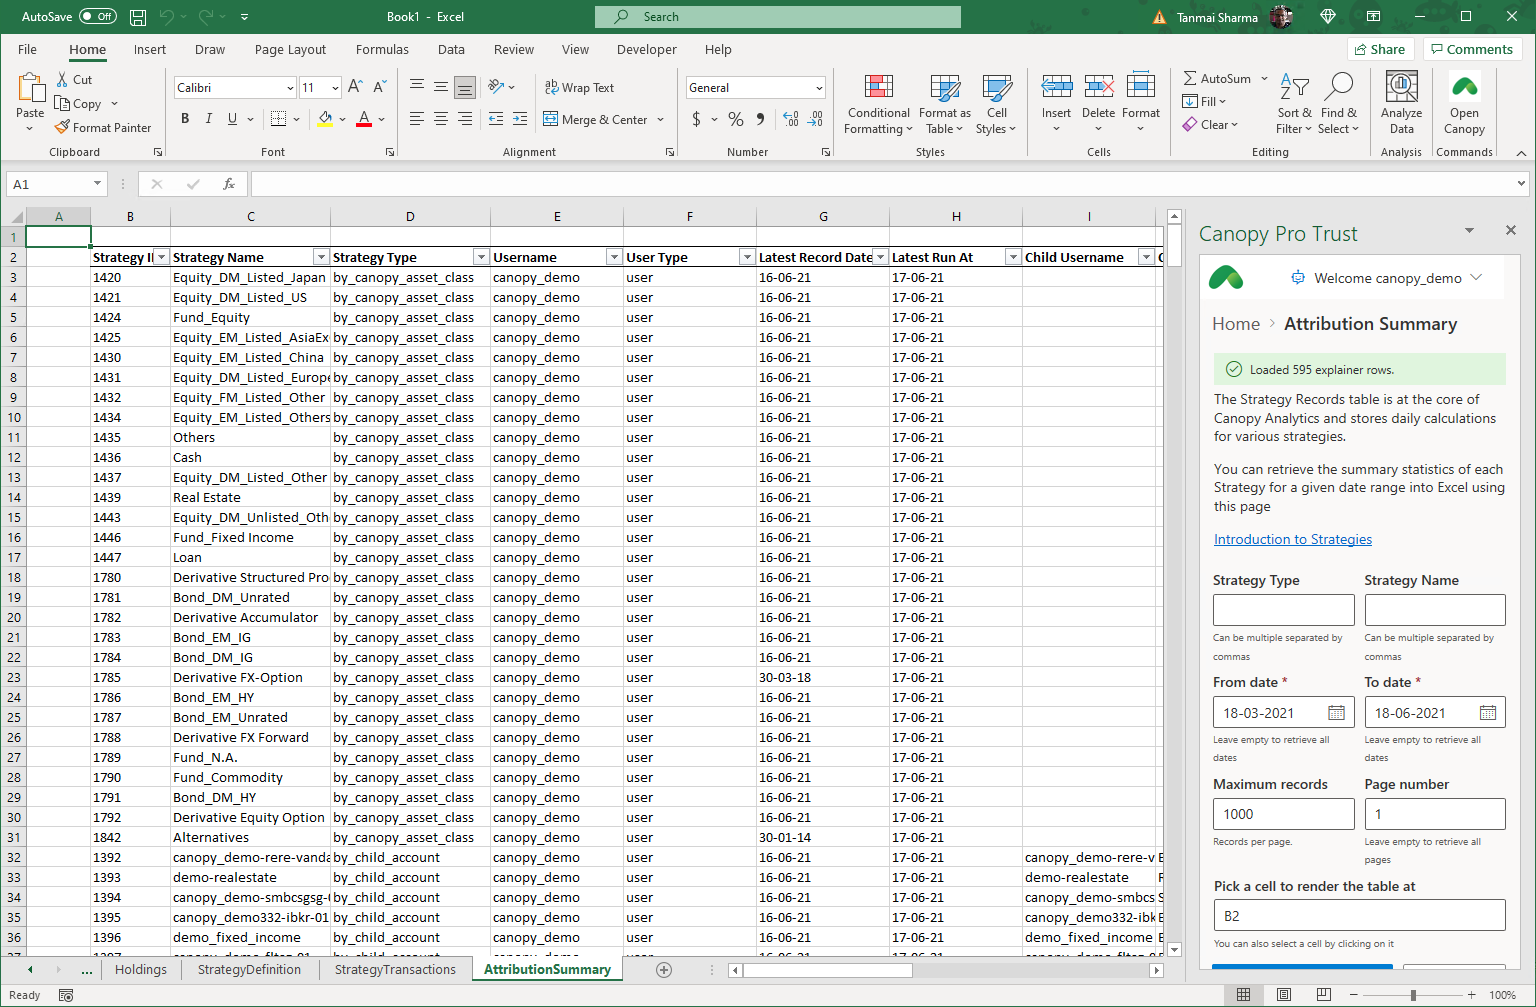 Attribution Summary as retrieved from the Excel Add-in